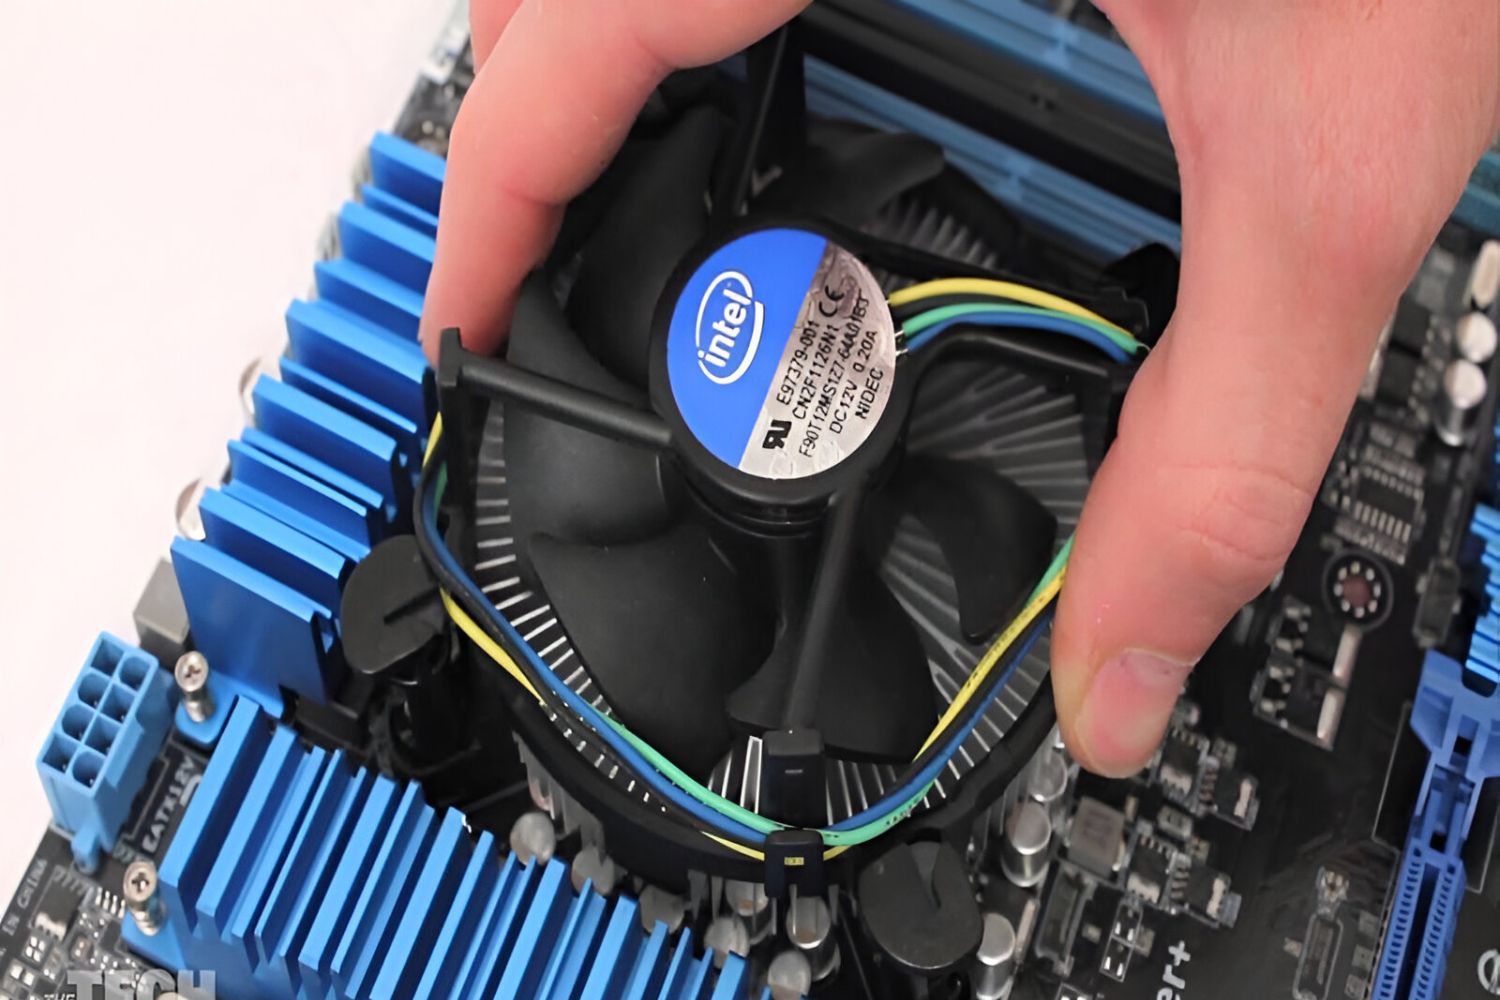 How To Install Intel CPU Cooler